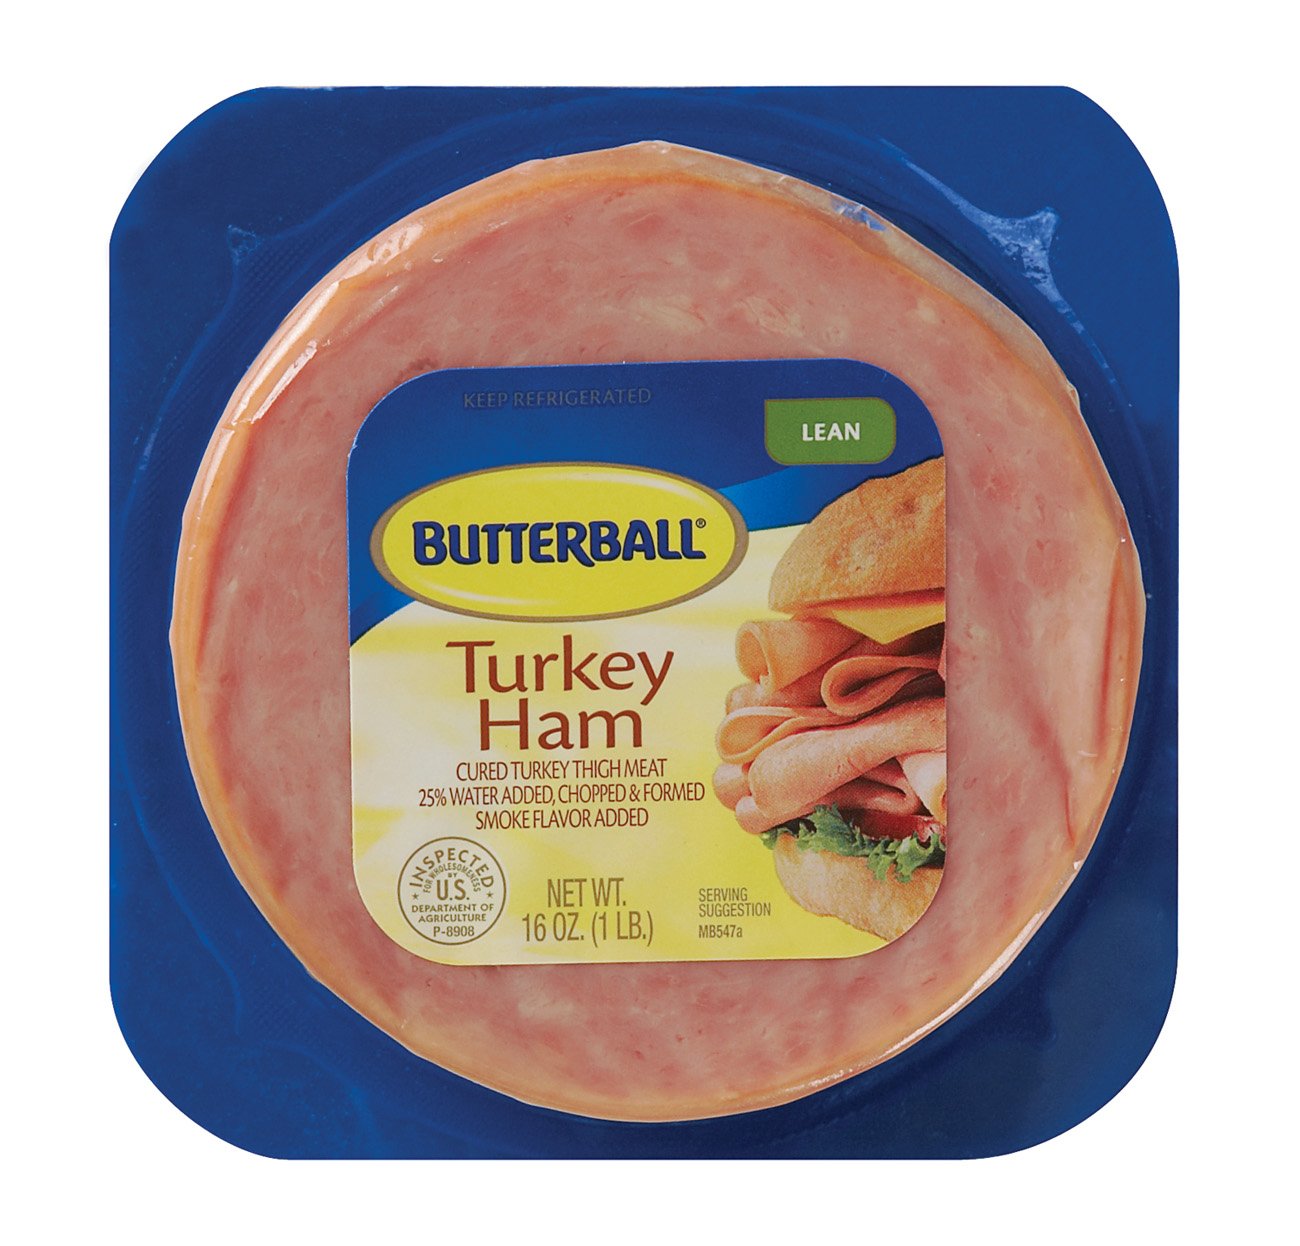 Butterball Lean Turkey Ham Shop Meat at HEB